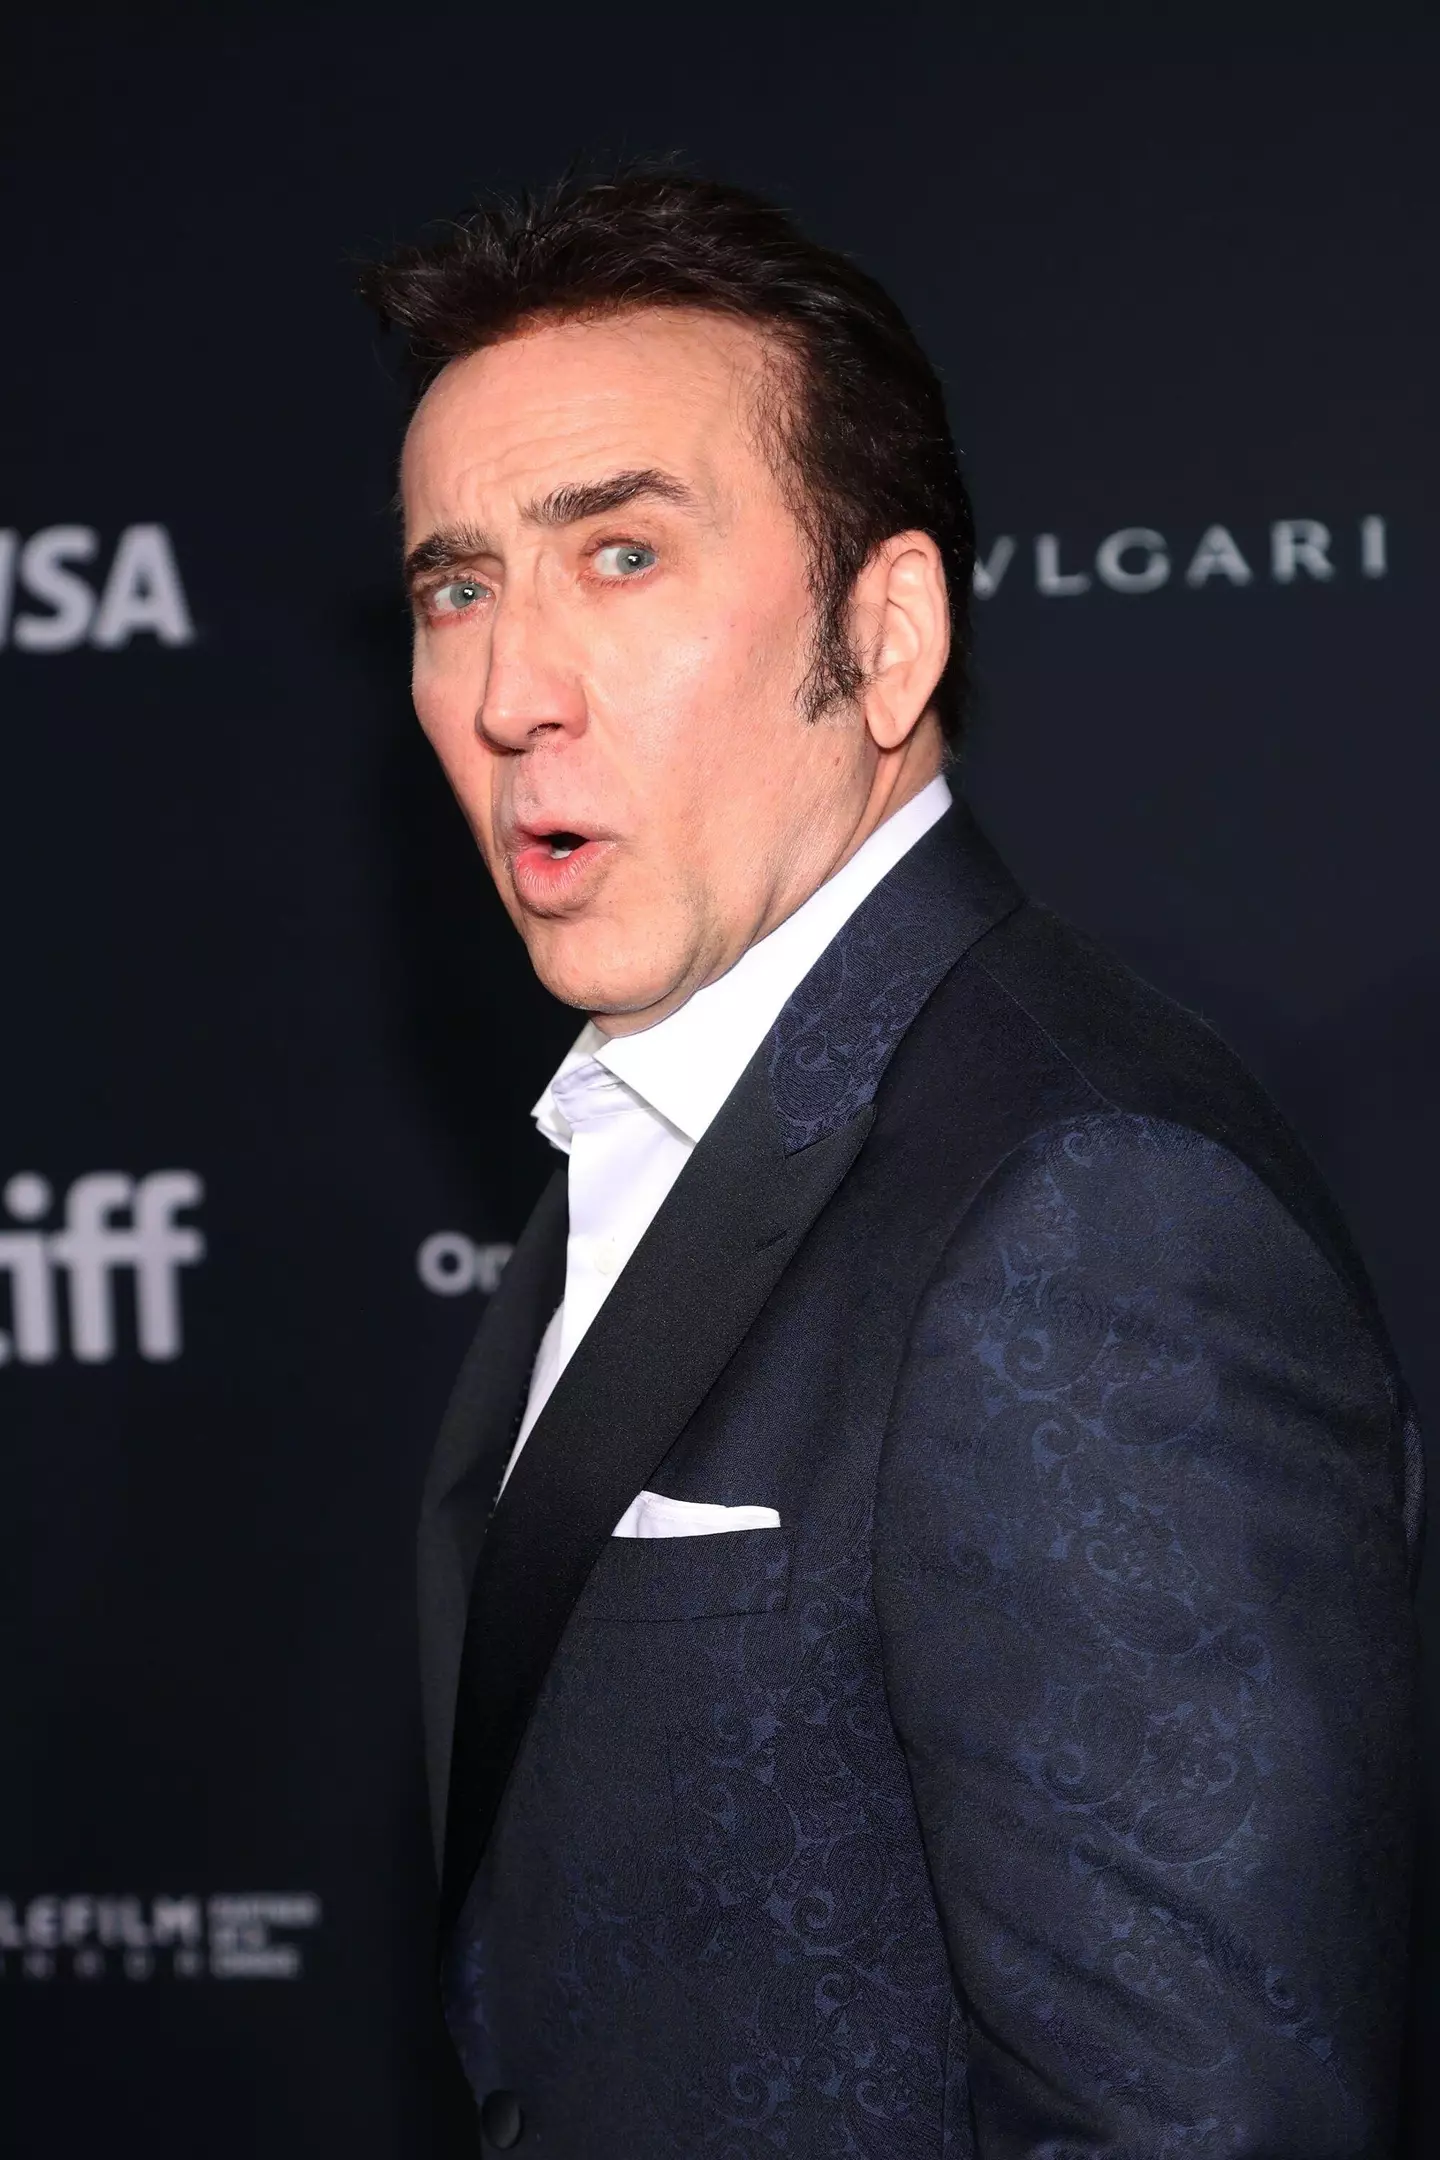 Nicolas Cage has never been part of the MCU, but did he ever want to?